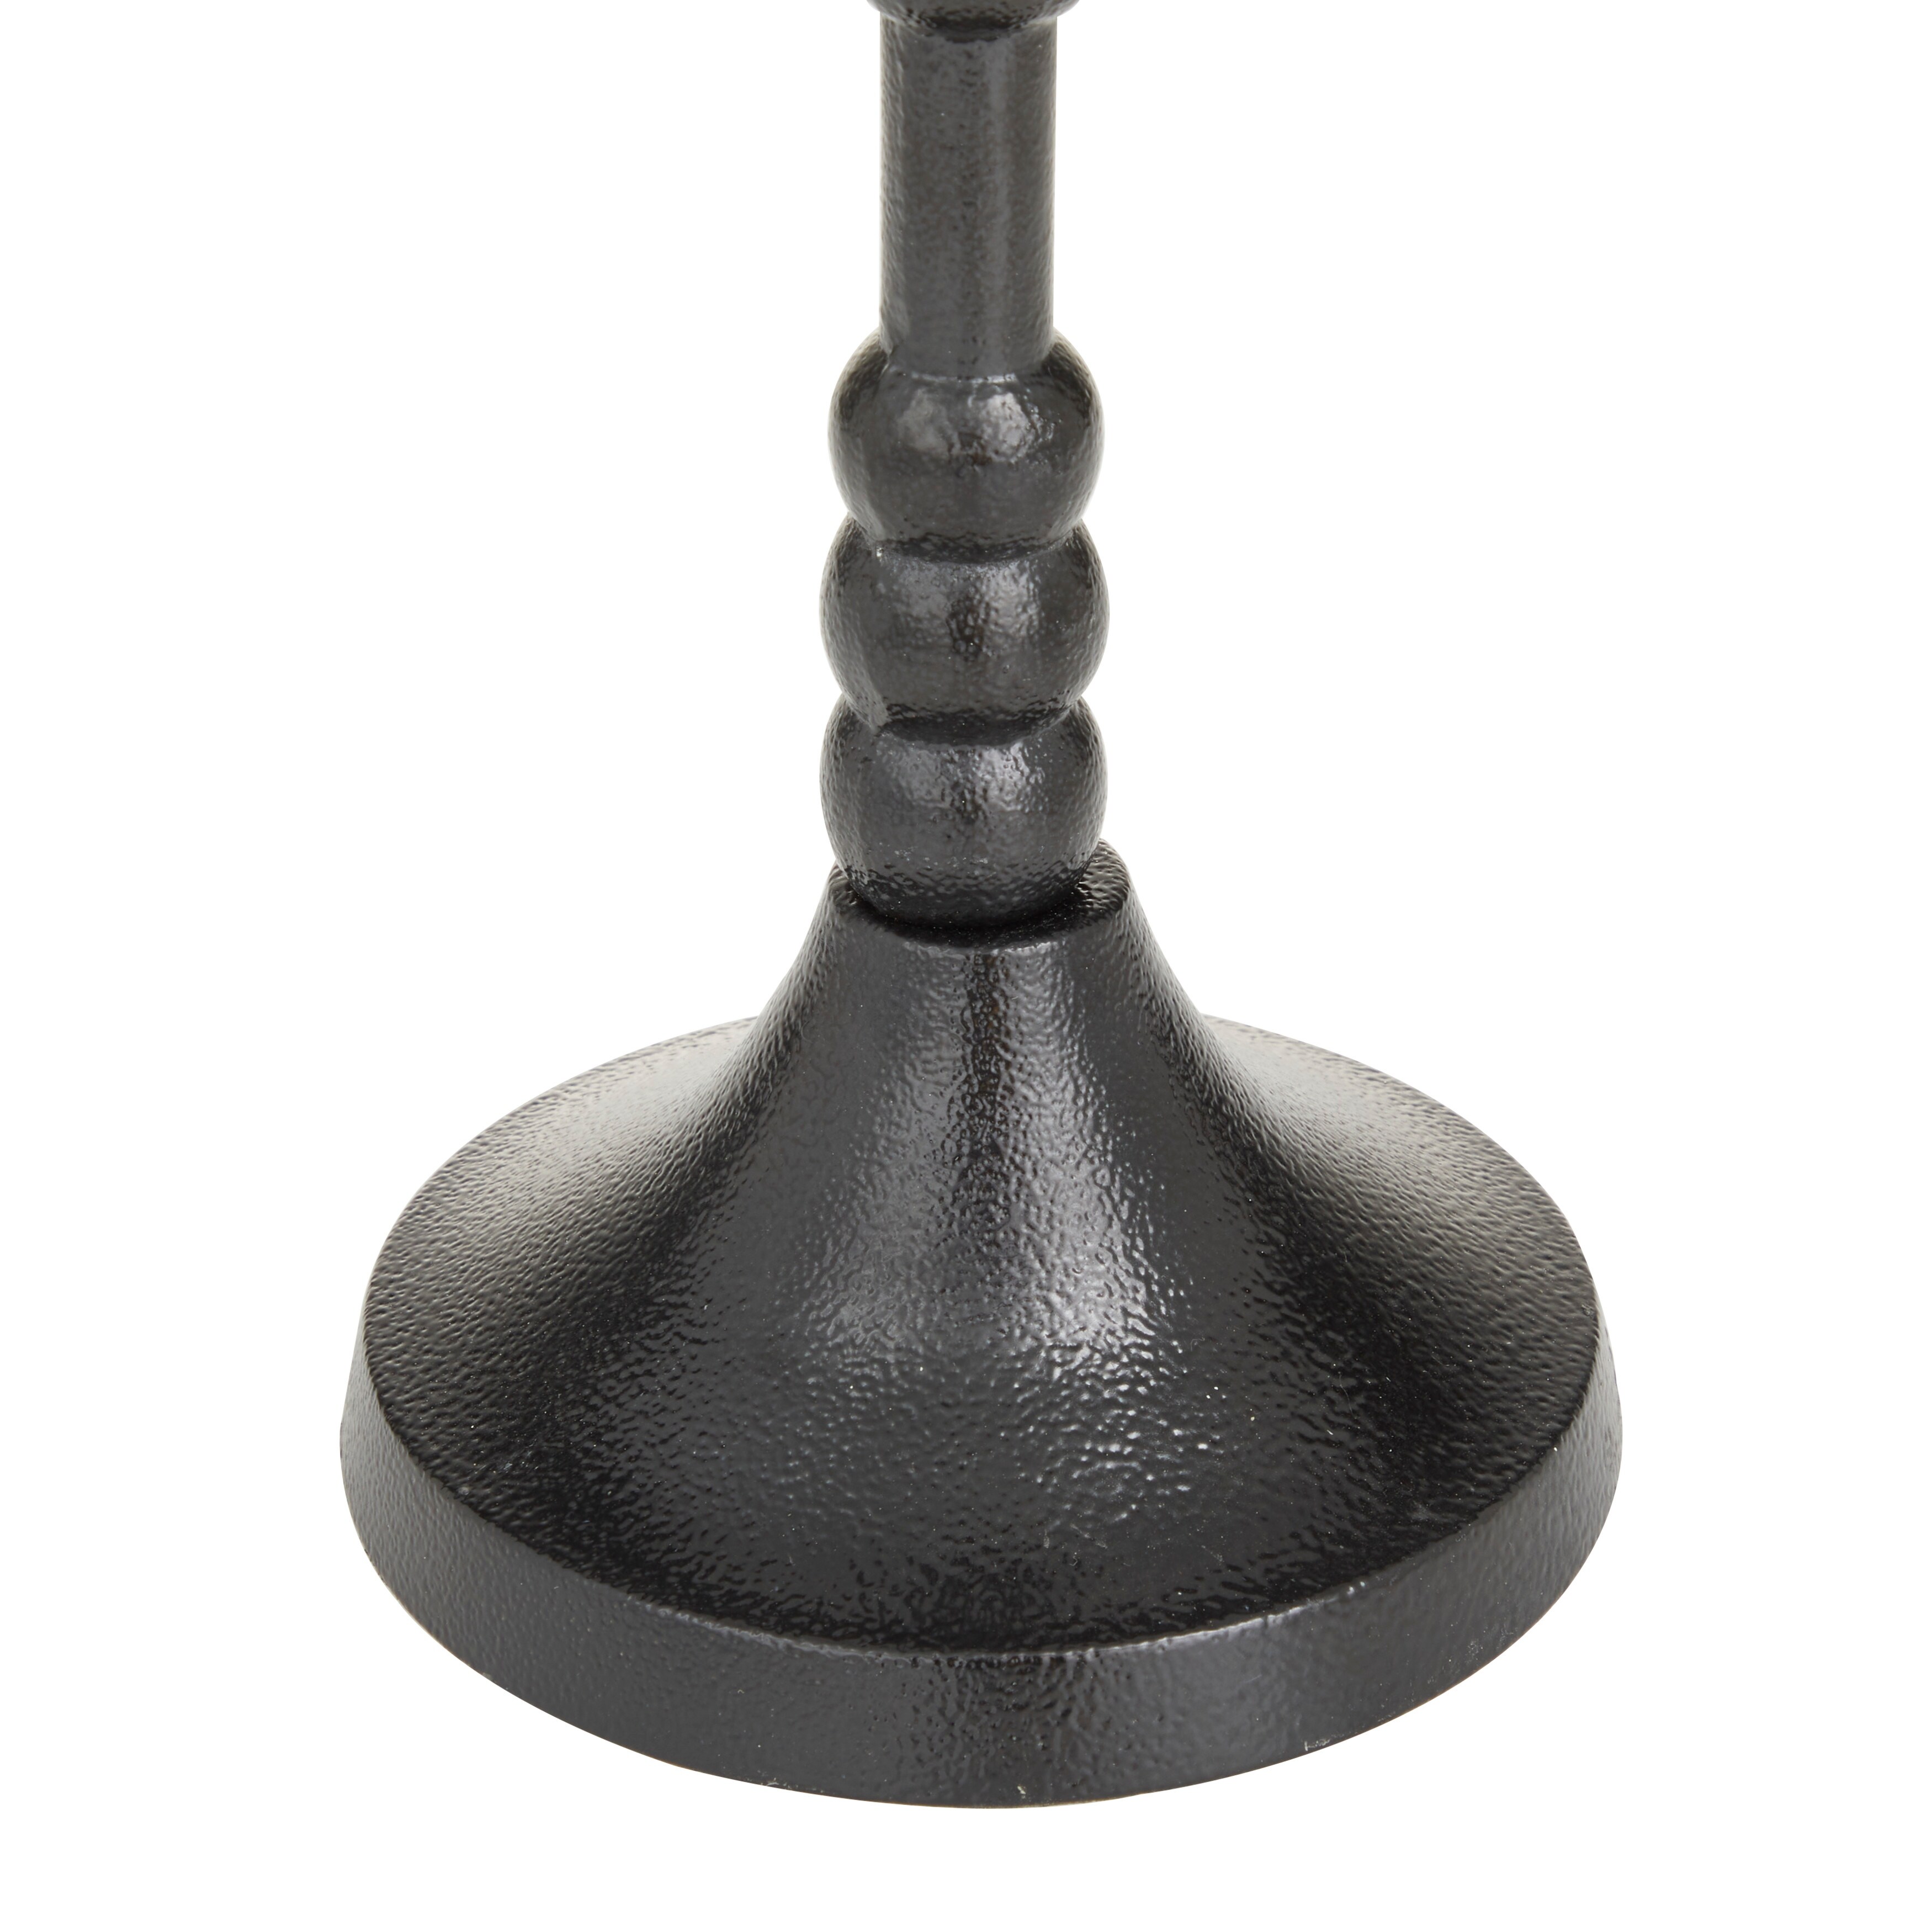 Black Iron Industrial Candle Holder (Set of 3) - 5 x 5 x 21